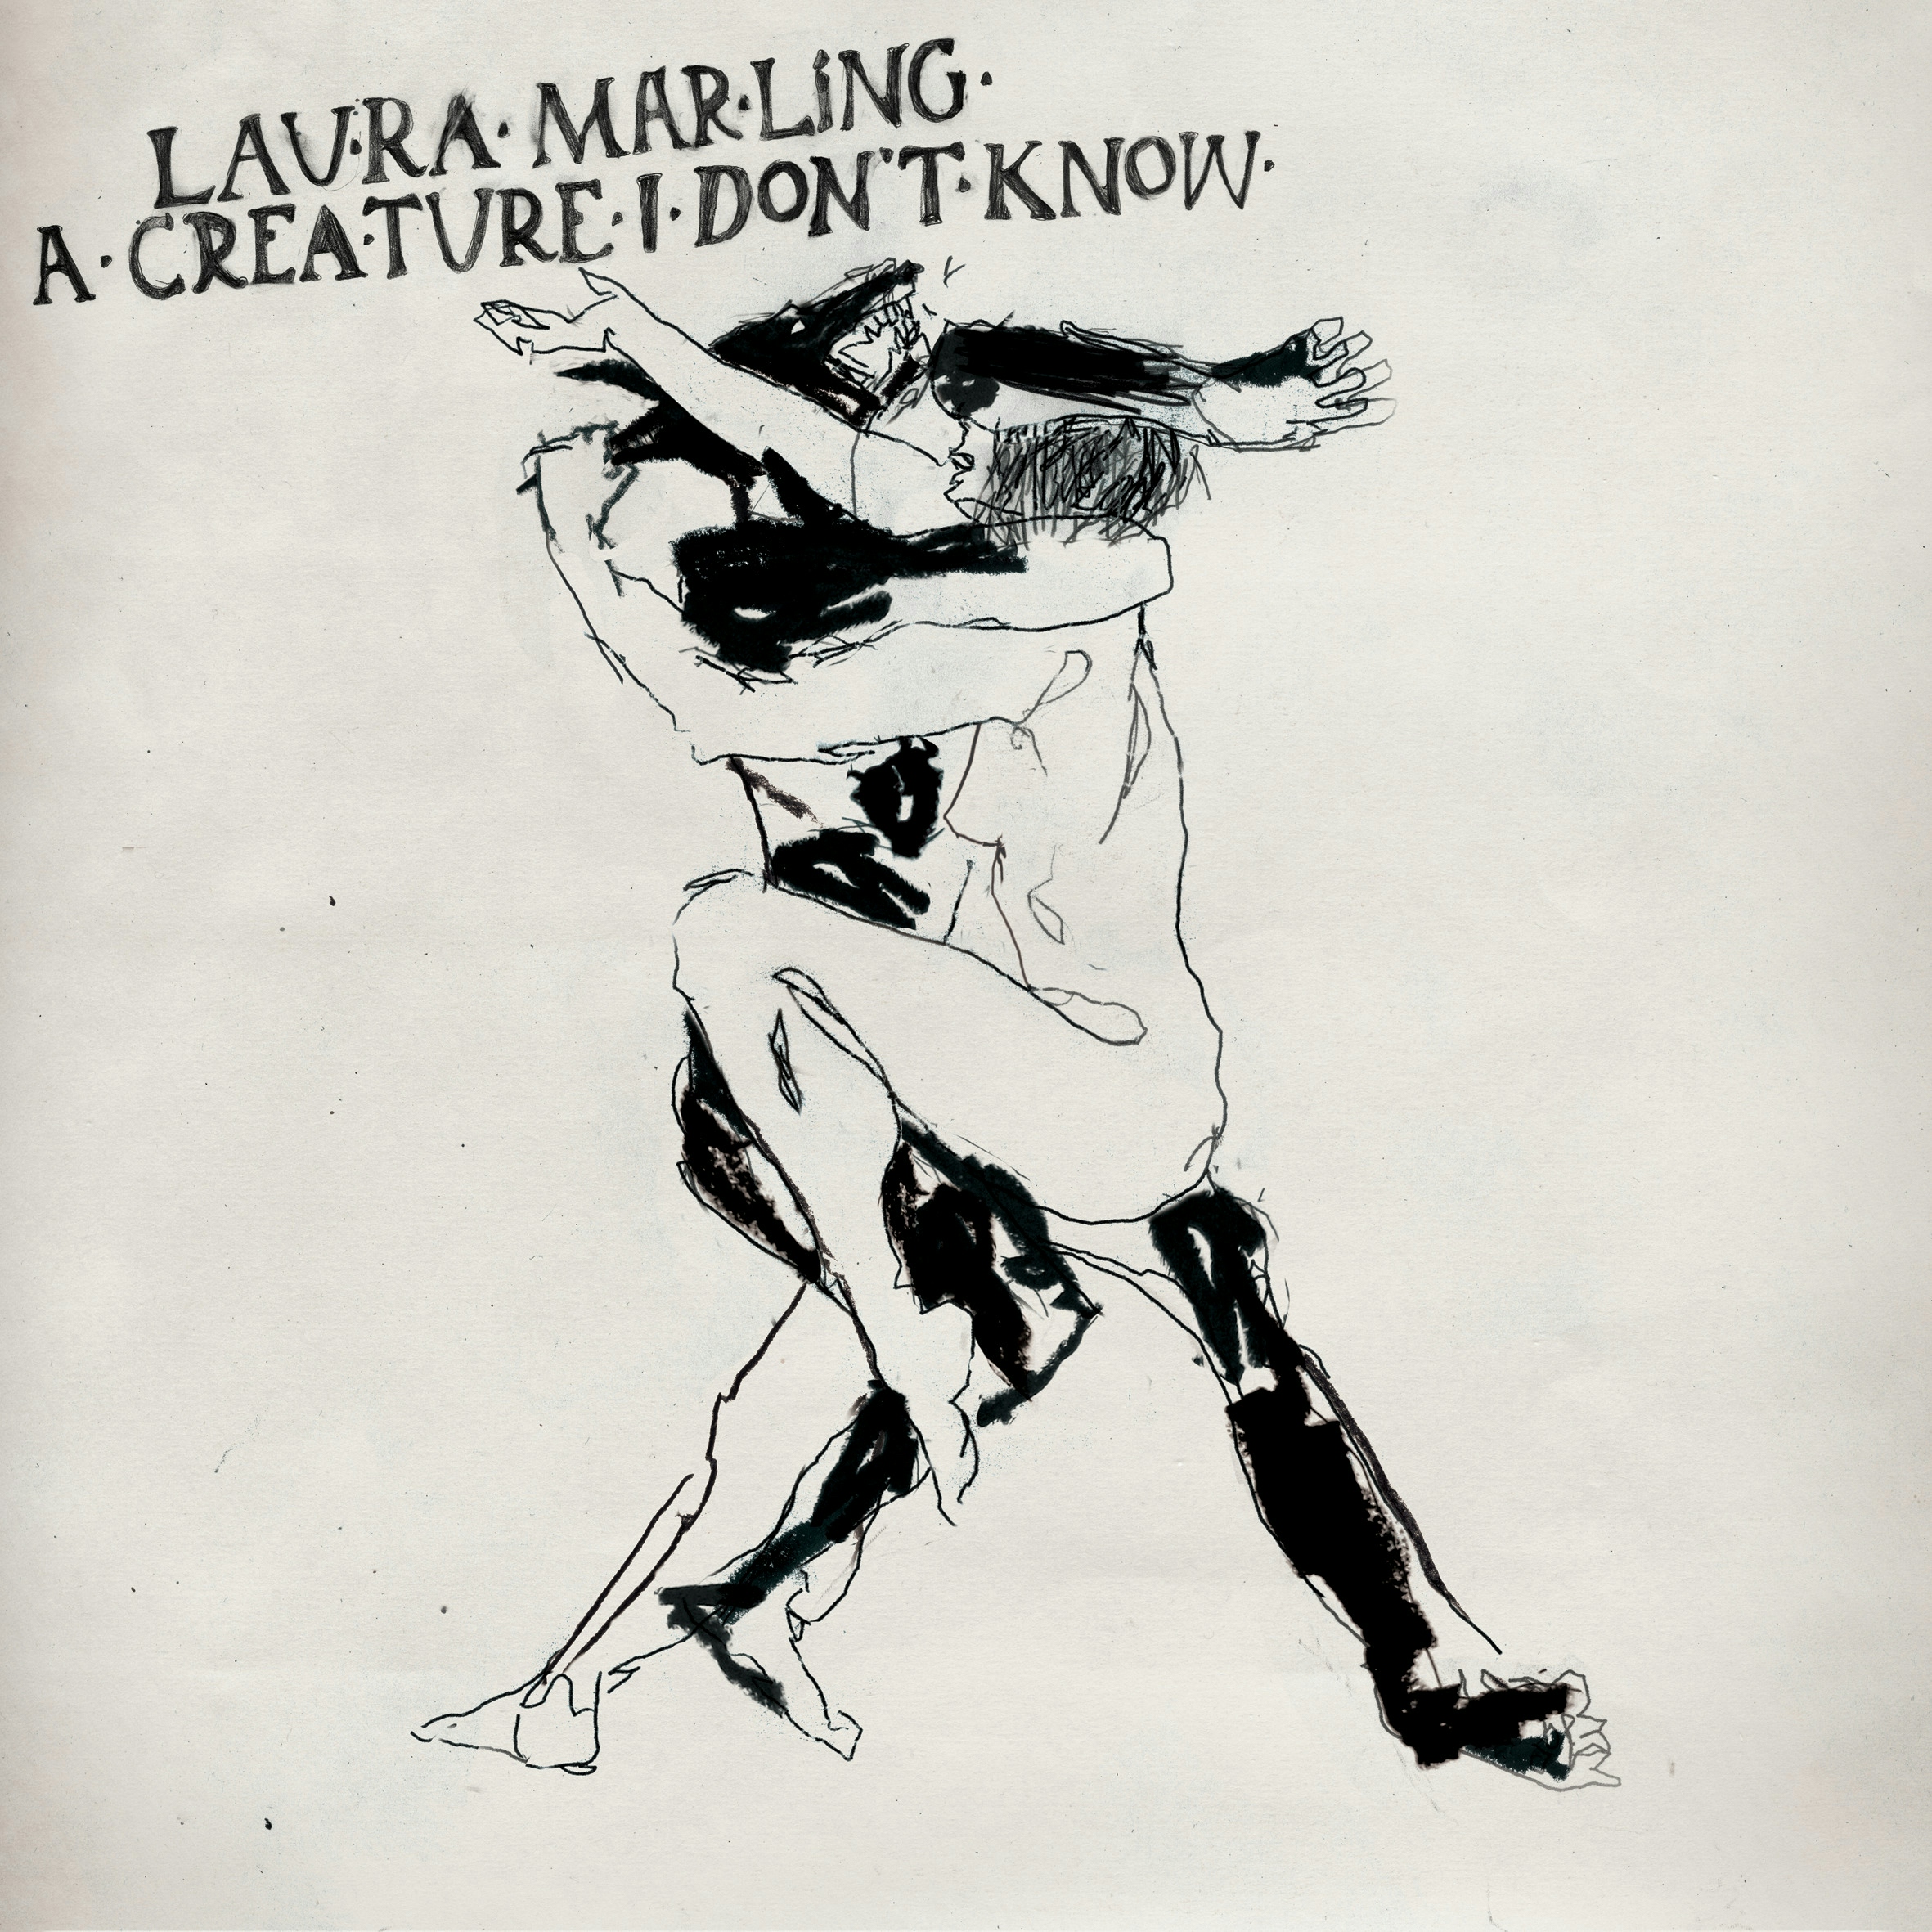 Album artwork for Album artwork for A Creature I Don't Know by Laura Marling by A Creature I Don't Know - Laura Marling